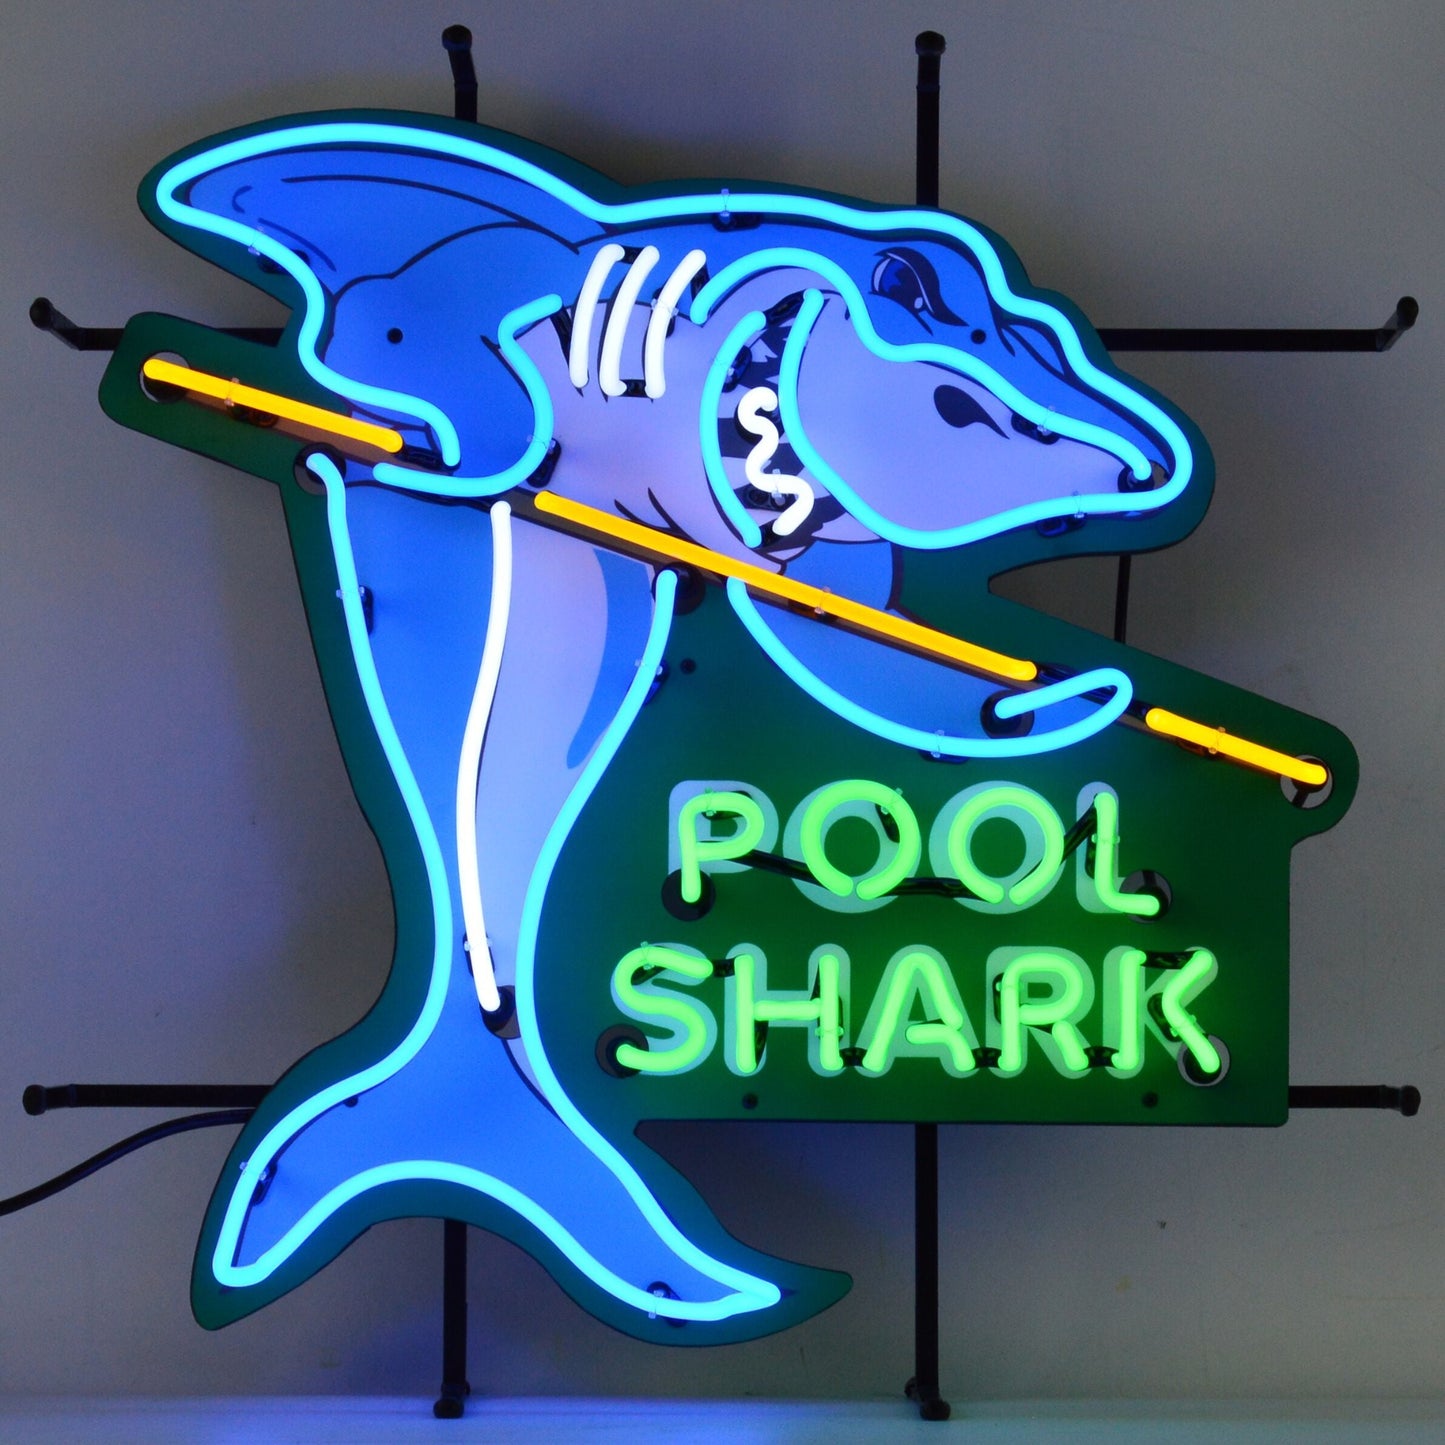 Pool Shark Neon Sign, 24 inches wide by 24 inches high, featuring a shark with a pool cue in neon lights.